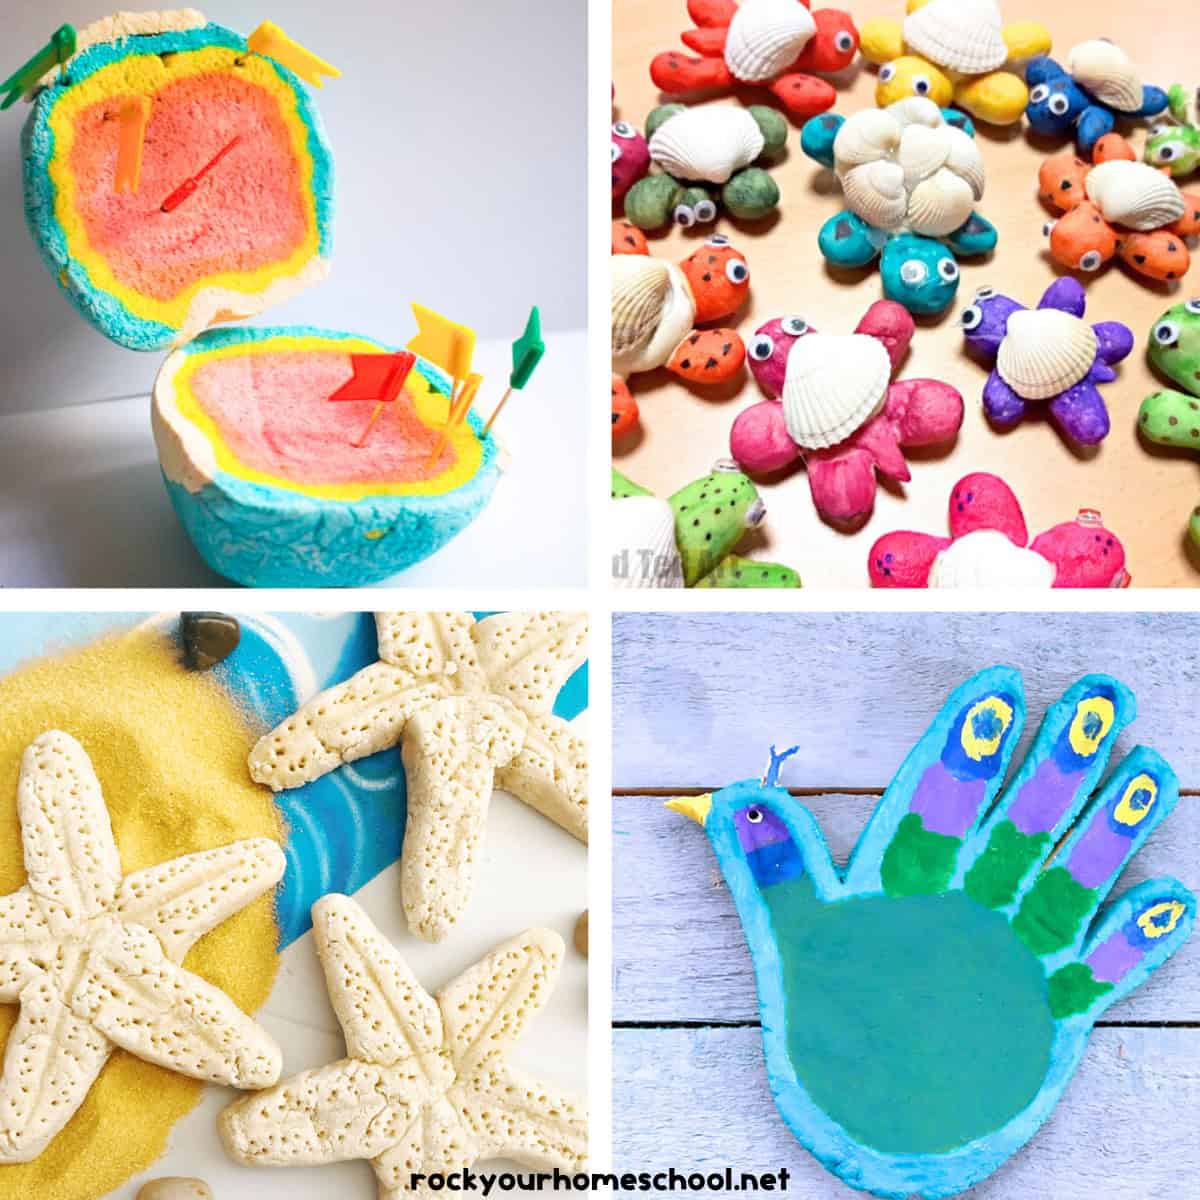 11 Salt Dough Ideas for Kids with Crafts You'll Love